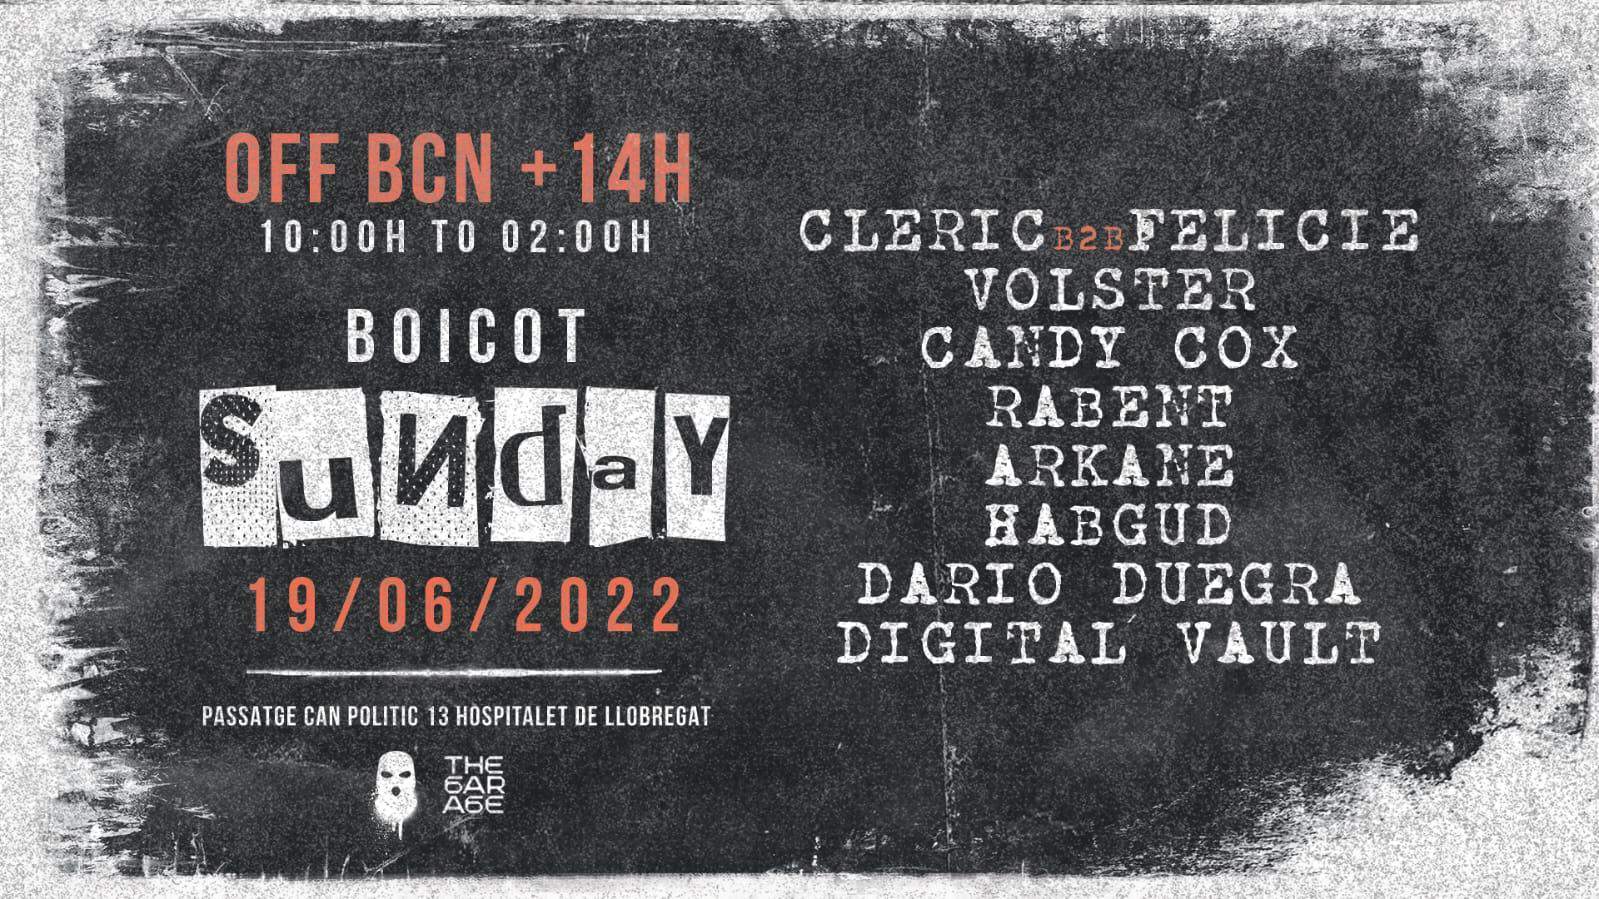 BOICOT pres. OFF BARCELONA +14H FEST. with Cleric, Felicie, Volster, Candy Cox - フライヤー表